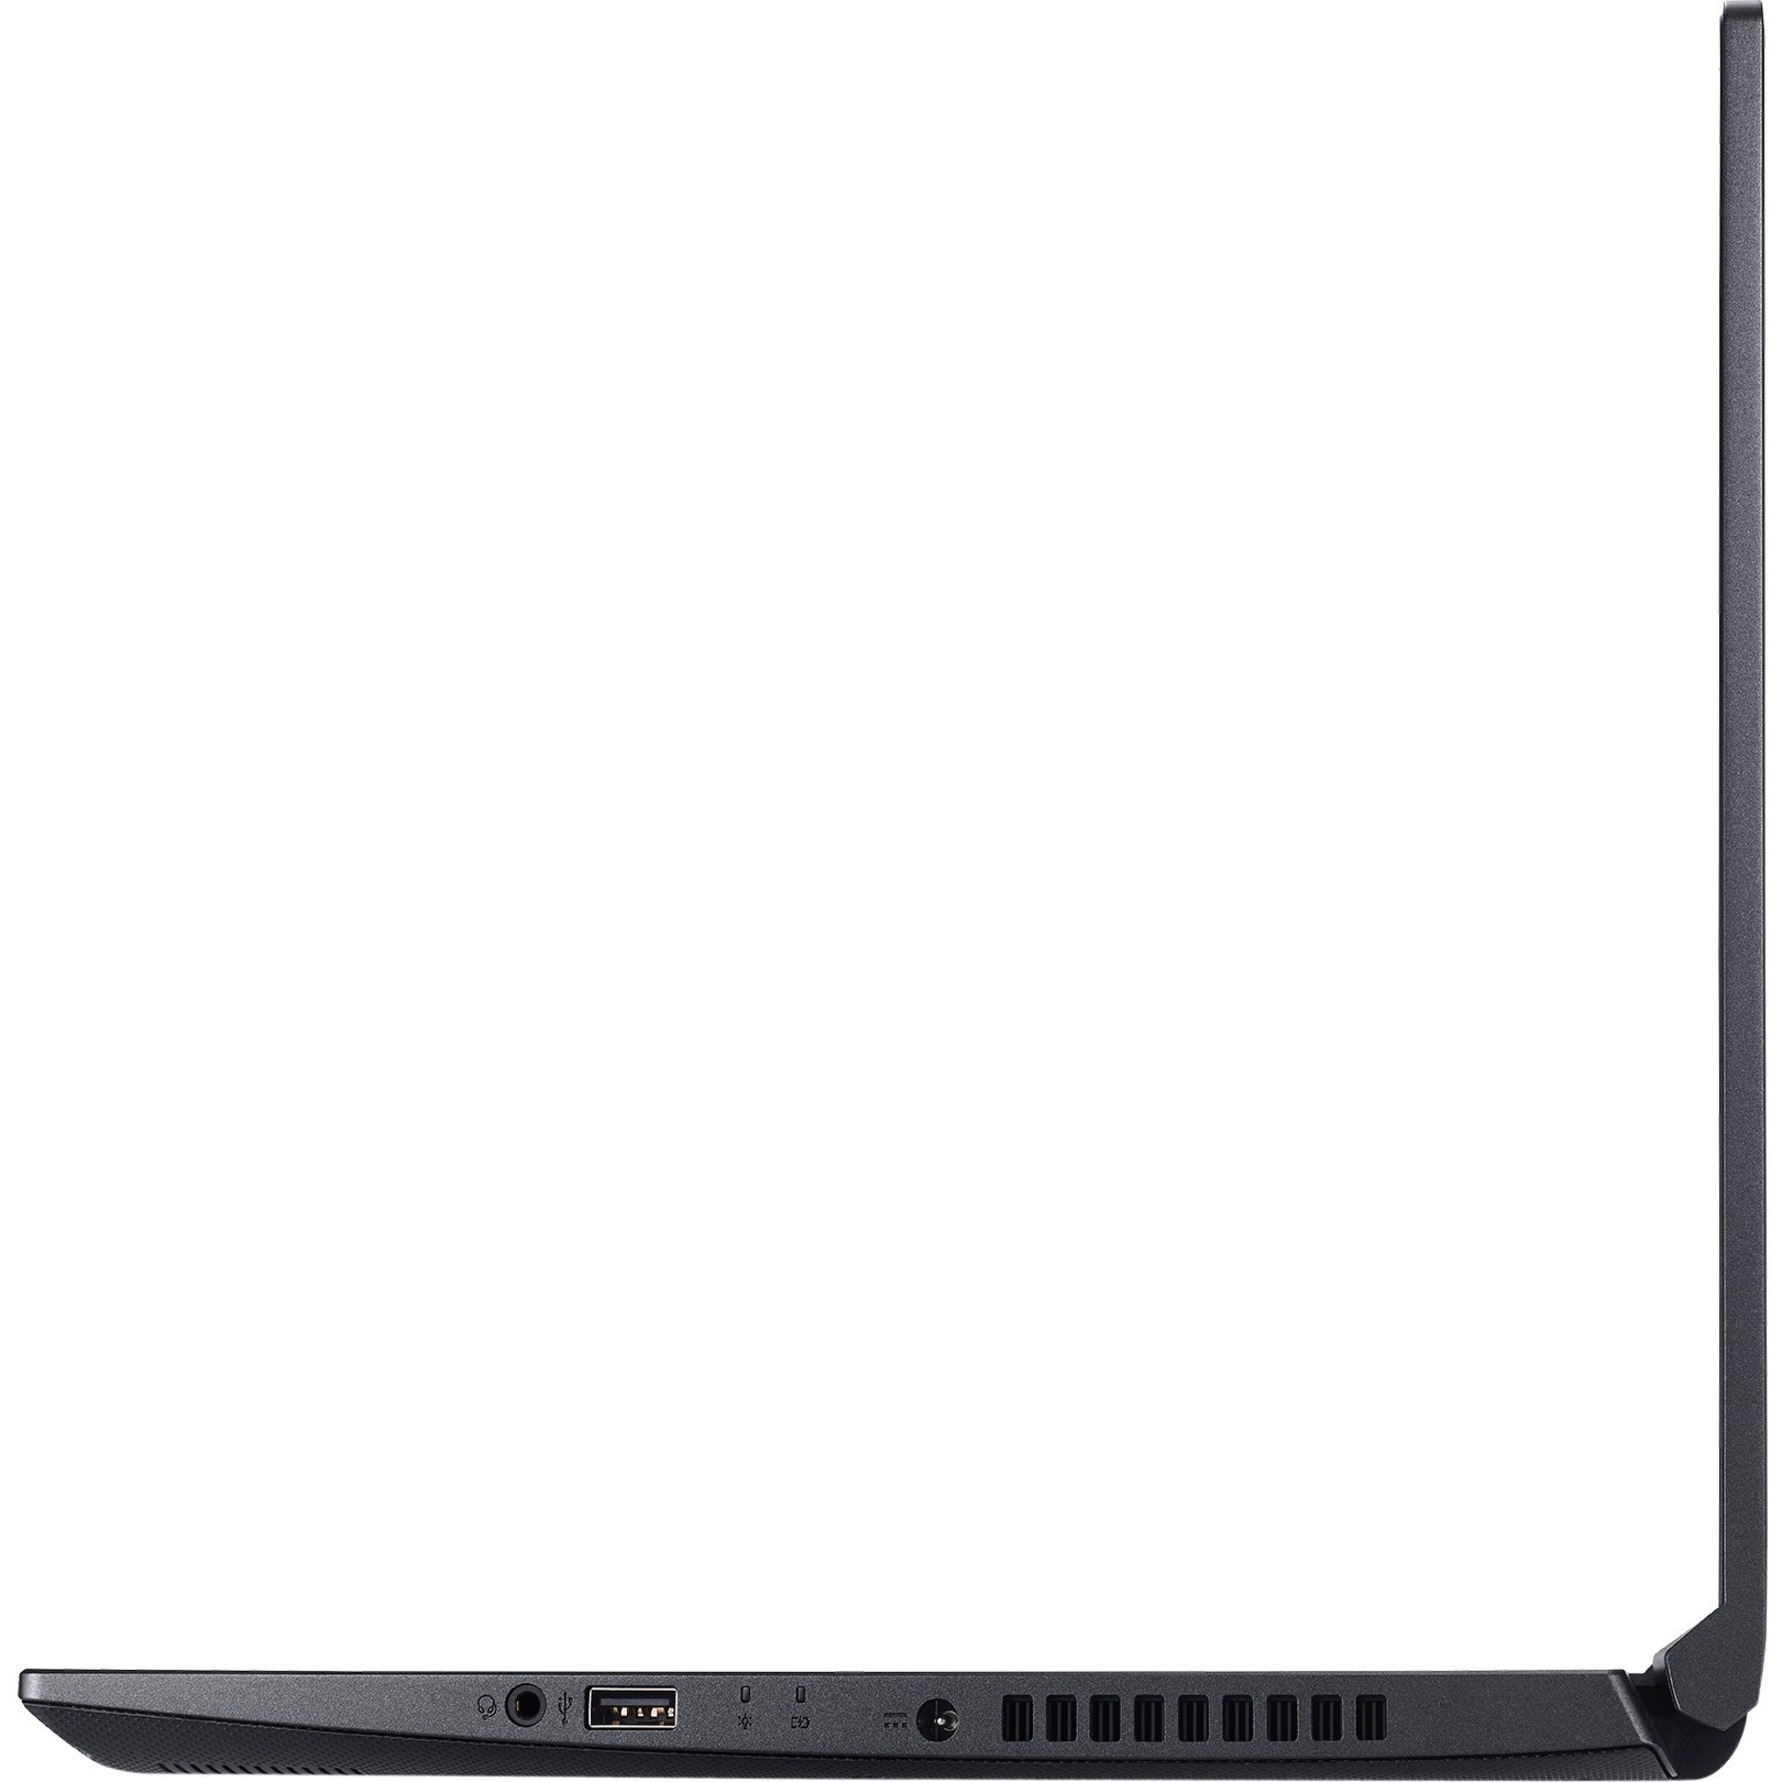 Acer Aspire 7 15.6" Full HD Laptop, Intel Core i5 i5-9300H, 512GB SSD, Windows 10 Home, A715-75G-544V - image 3 of 9